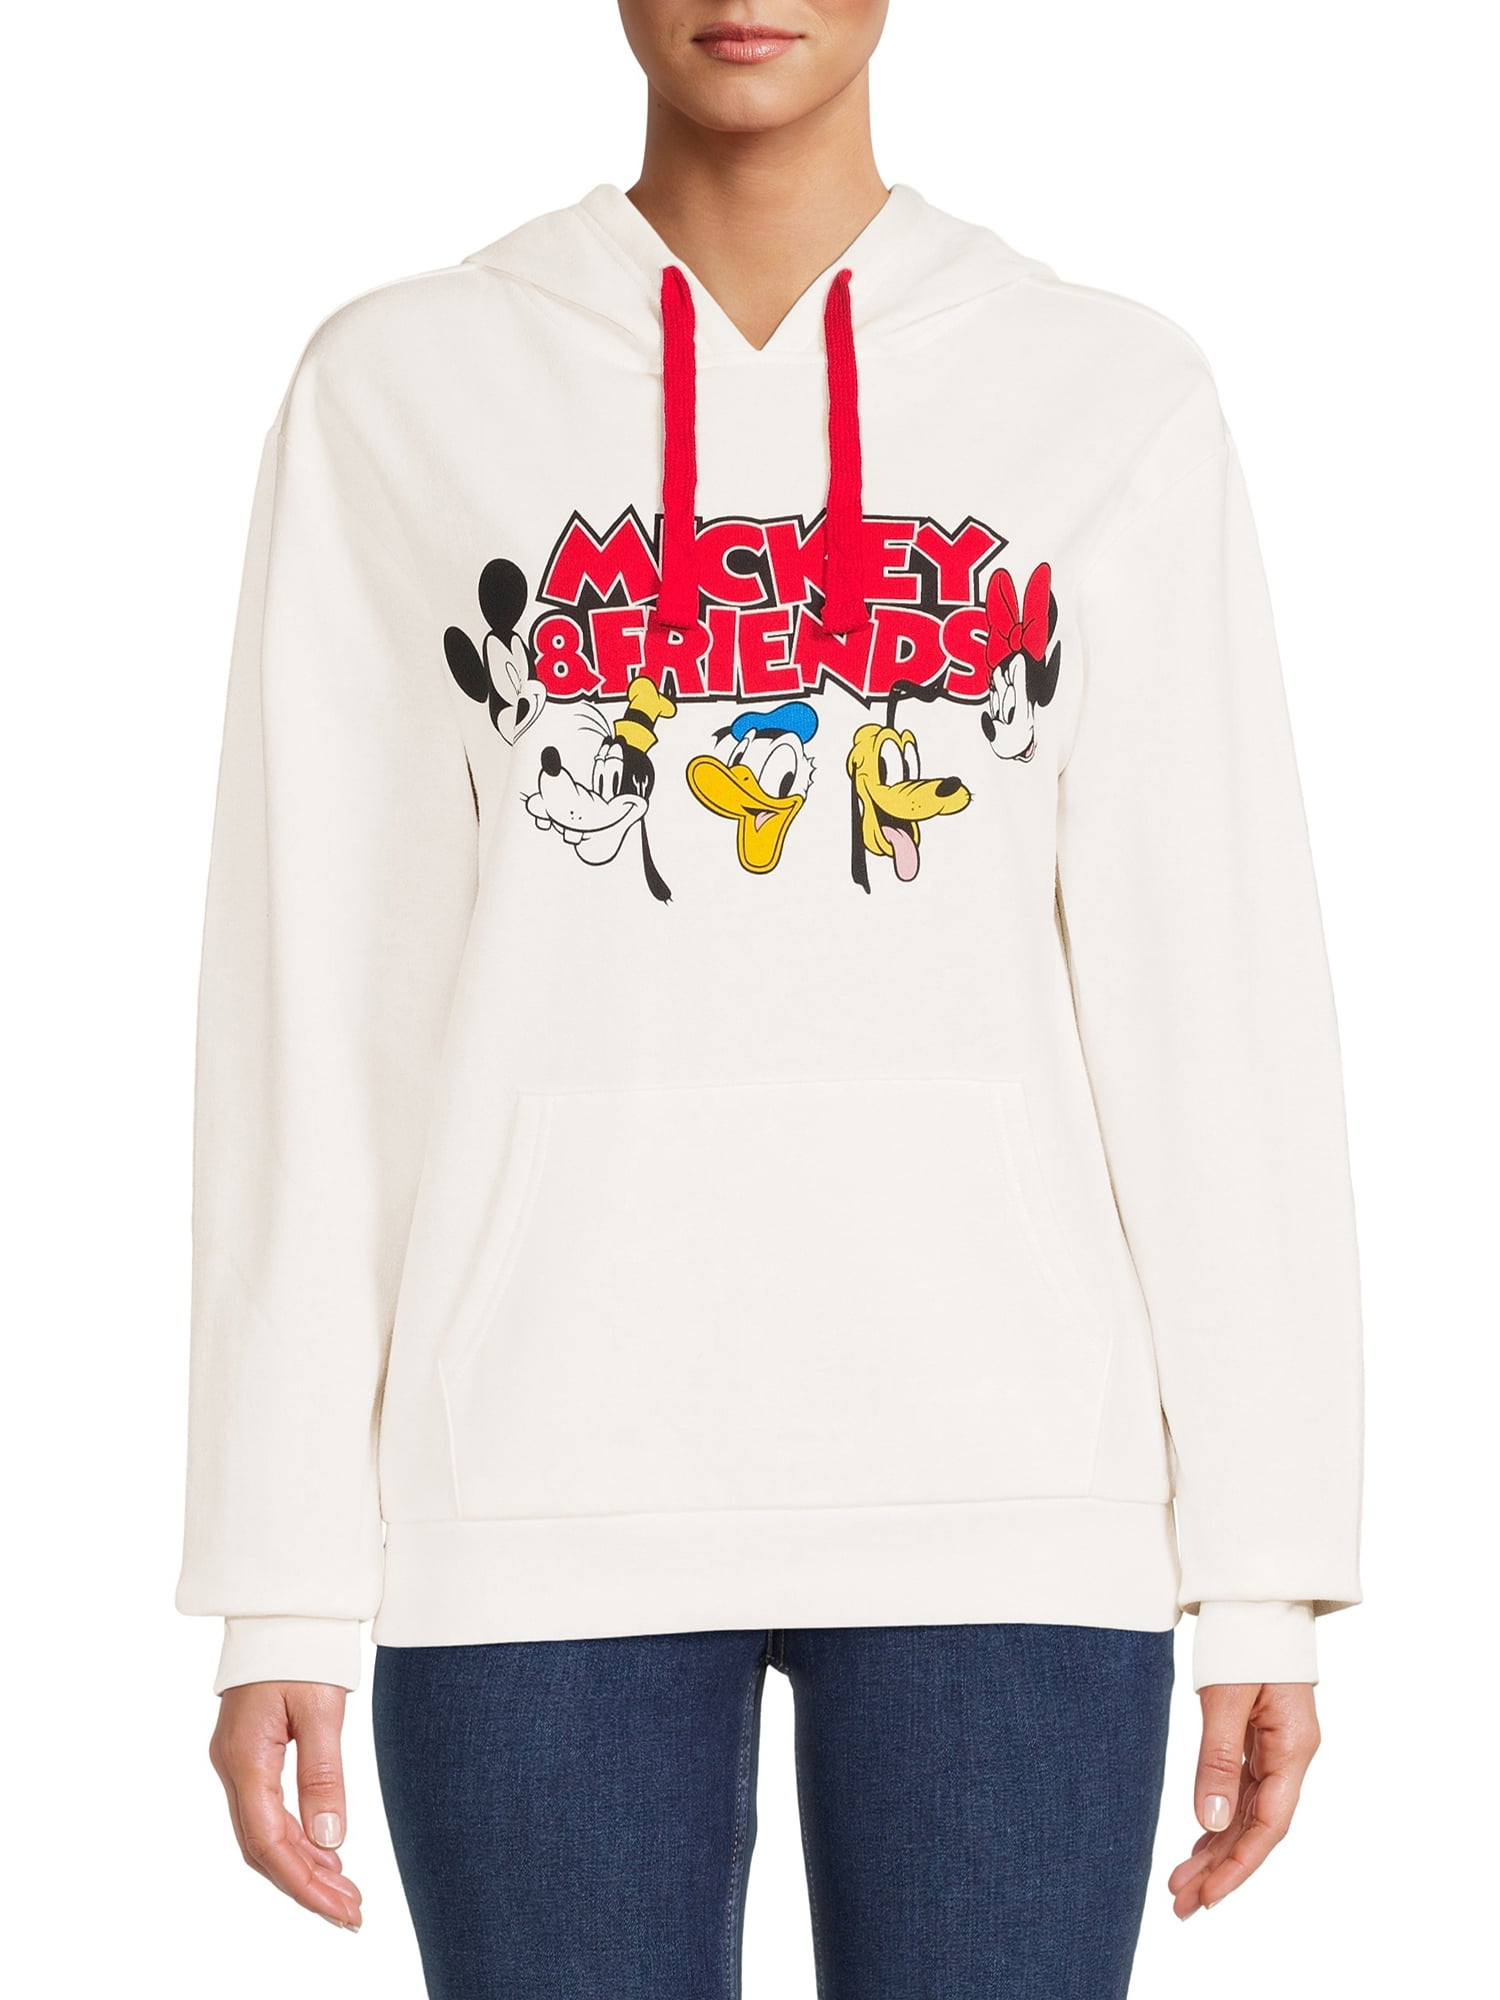 Licensed Graphics Mickey Mouse Junior's Graphic Print Hoodie